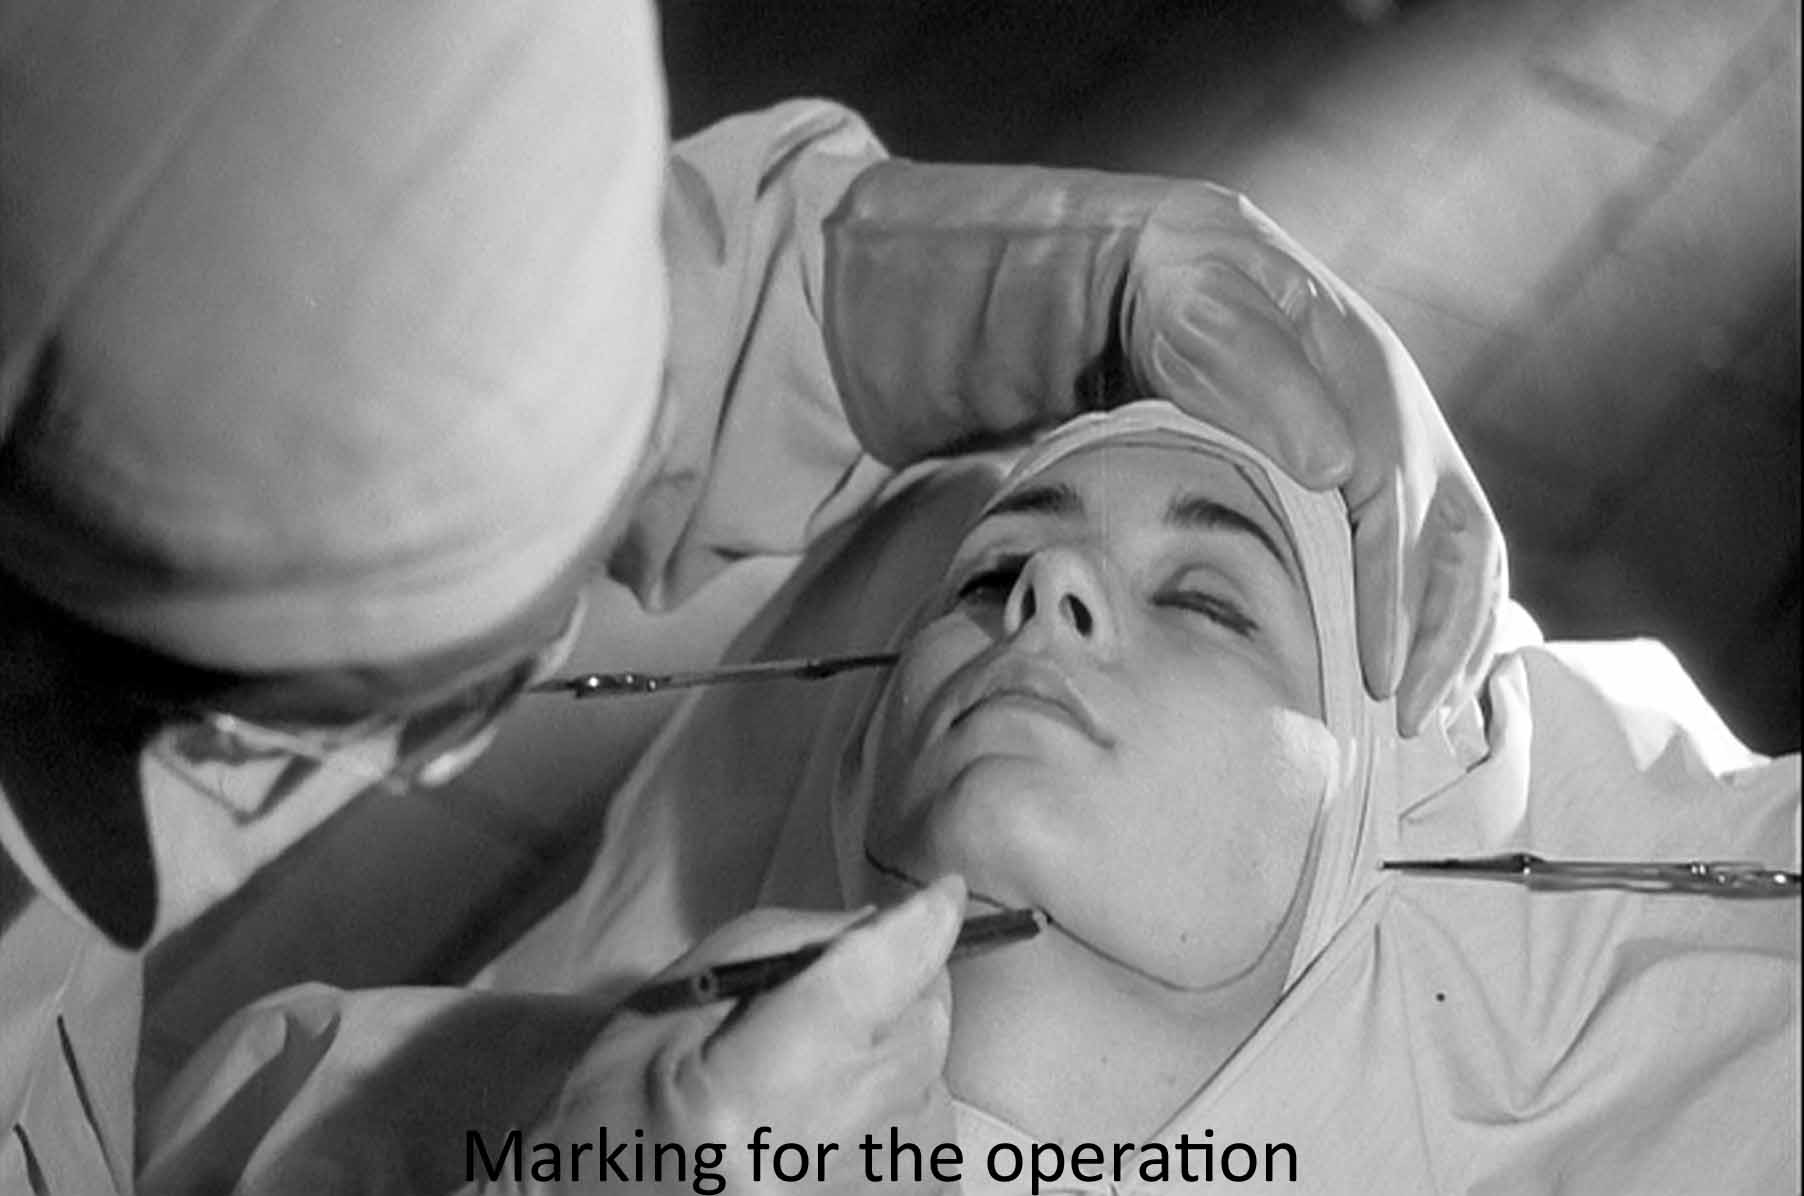 Marking for the operation